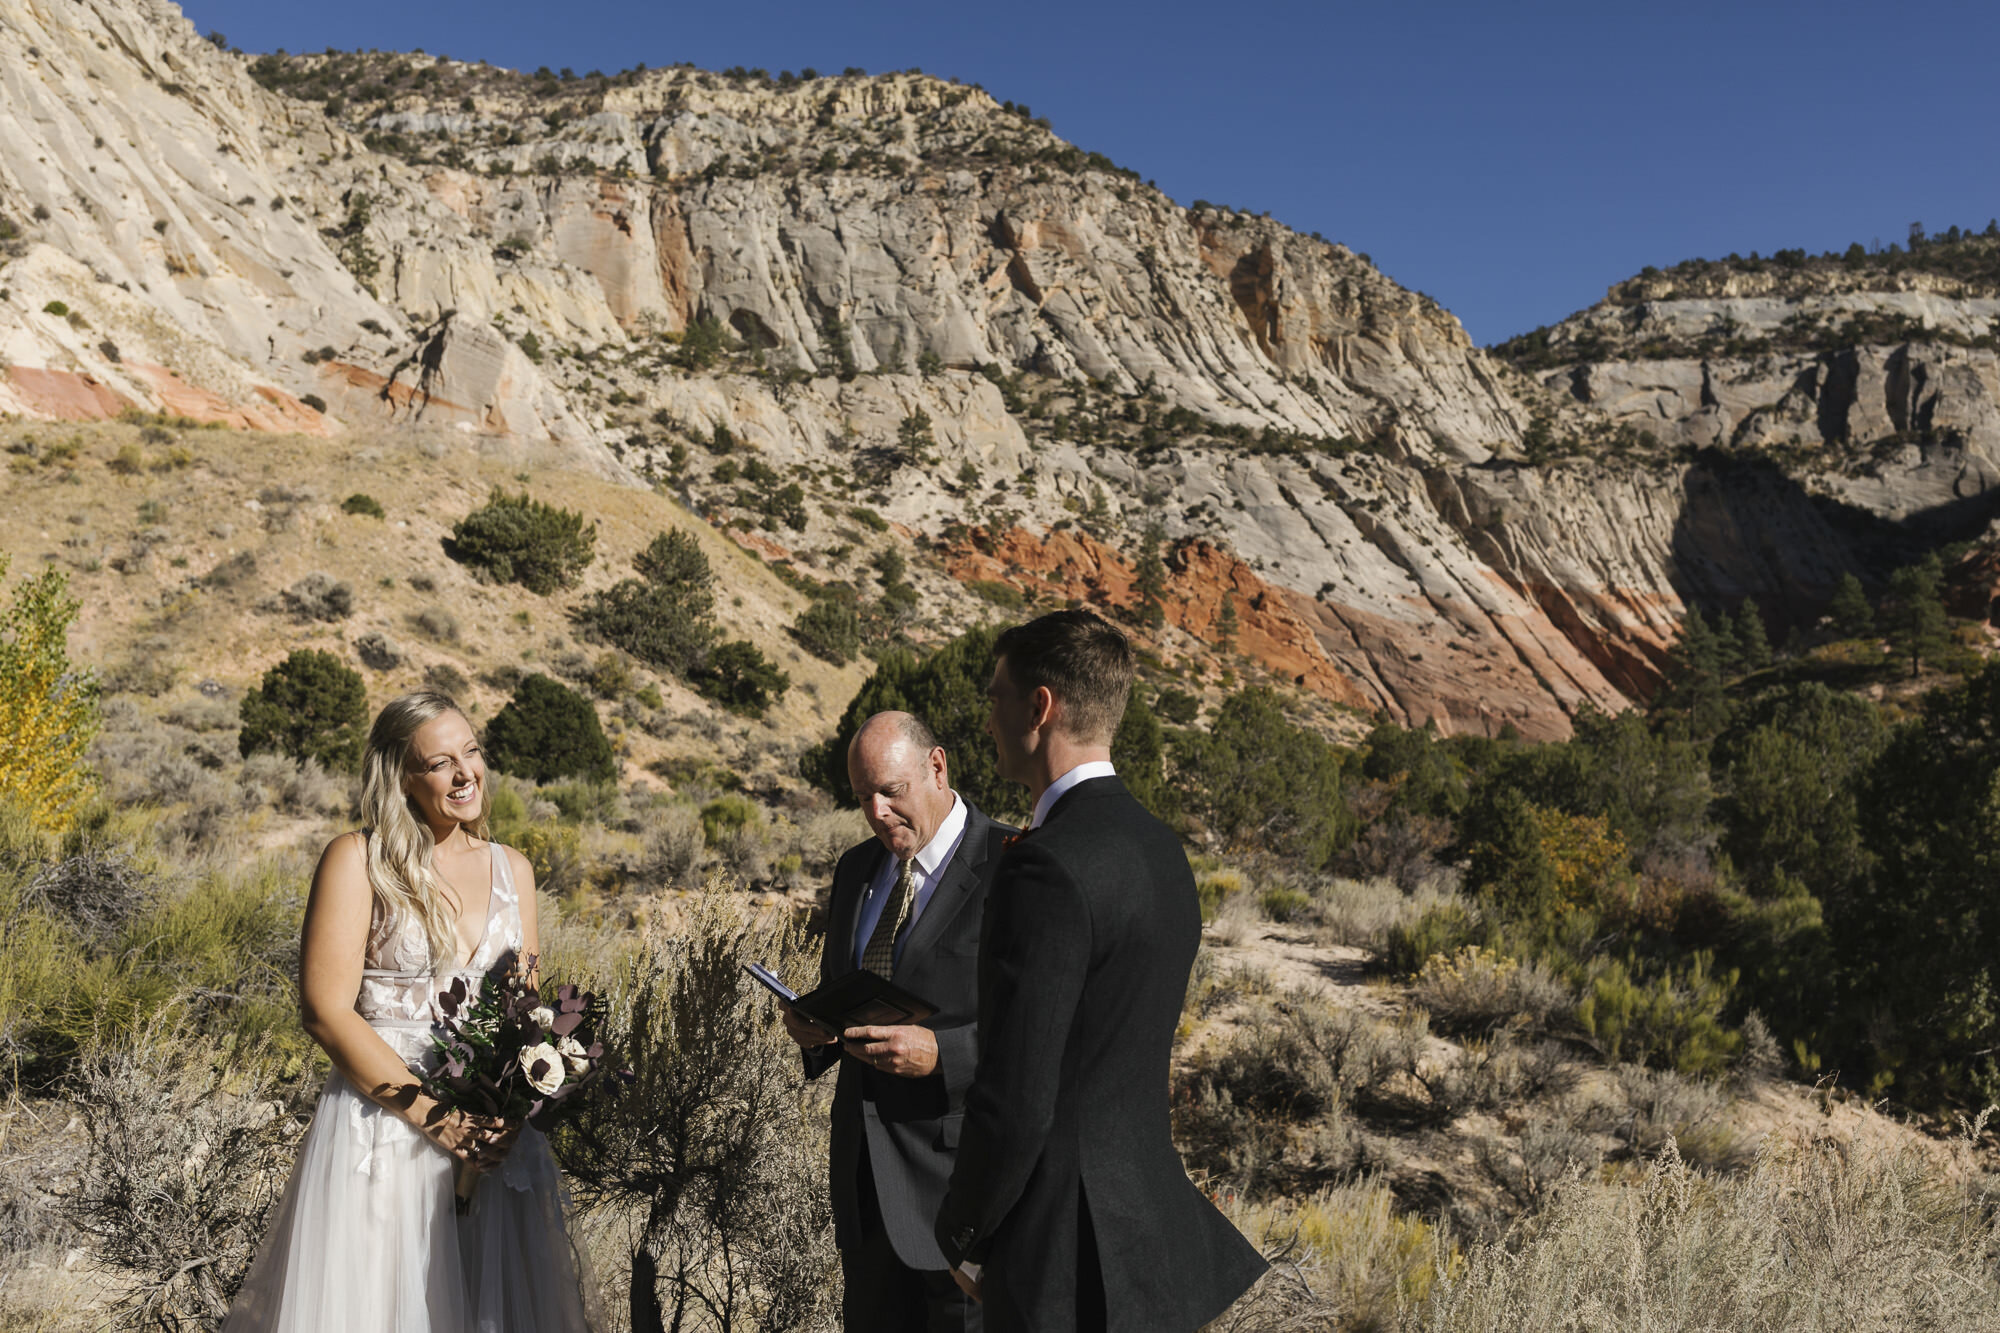 Bride and groom stand together at a gorgeous canyon location during their Utah desert wedding